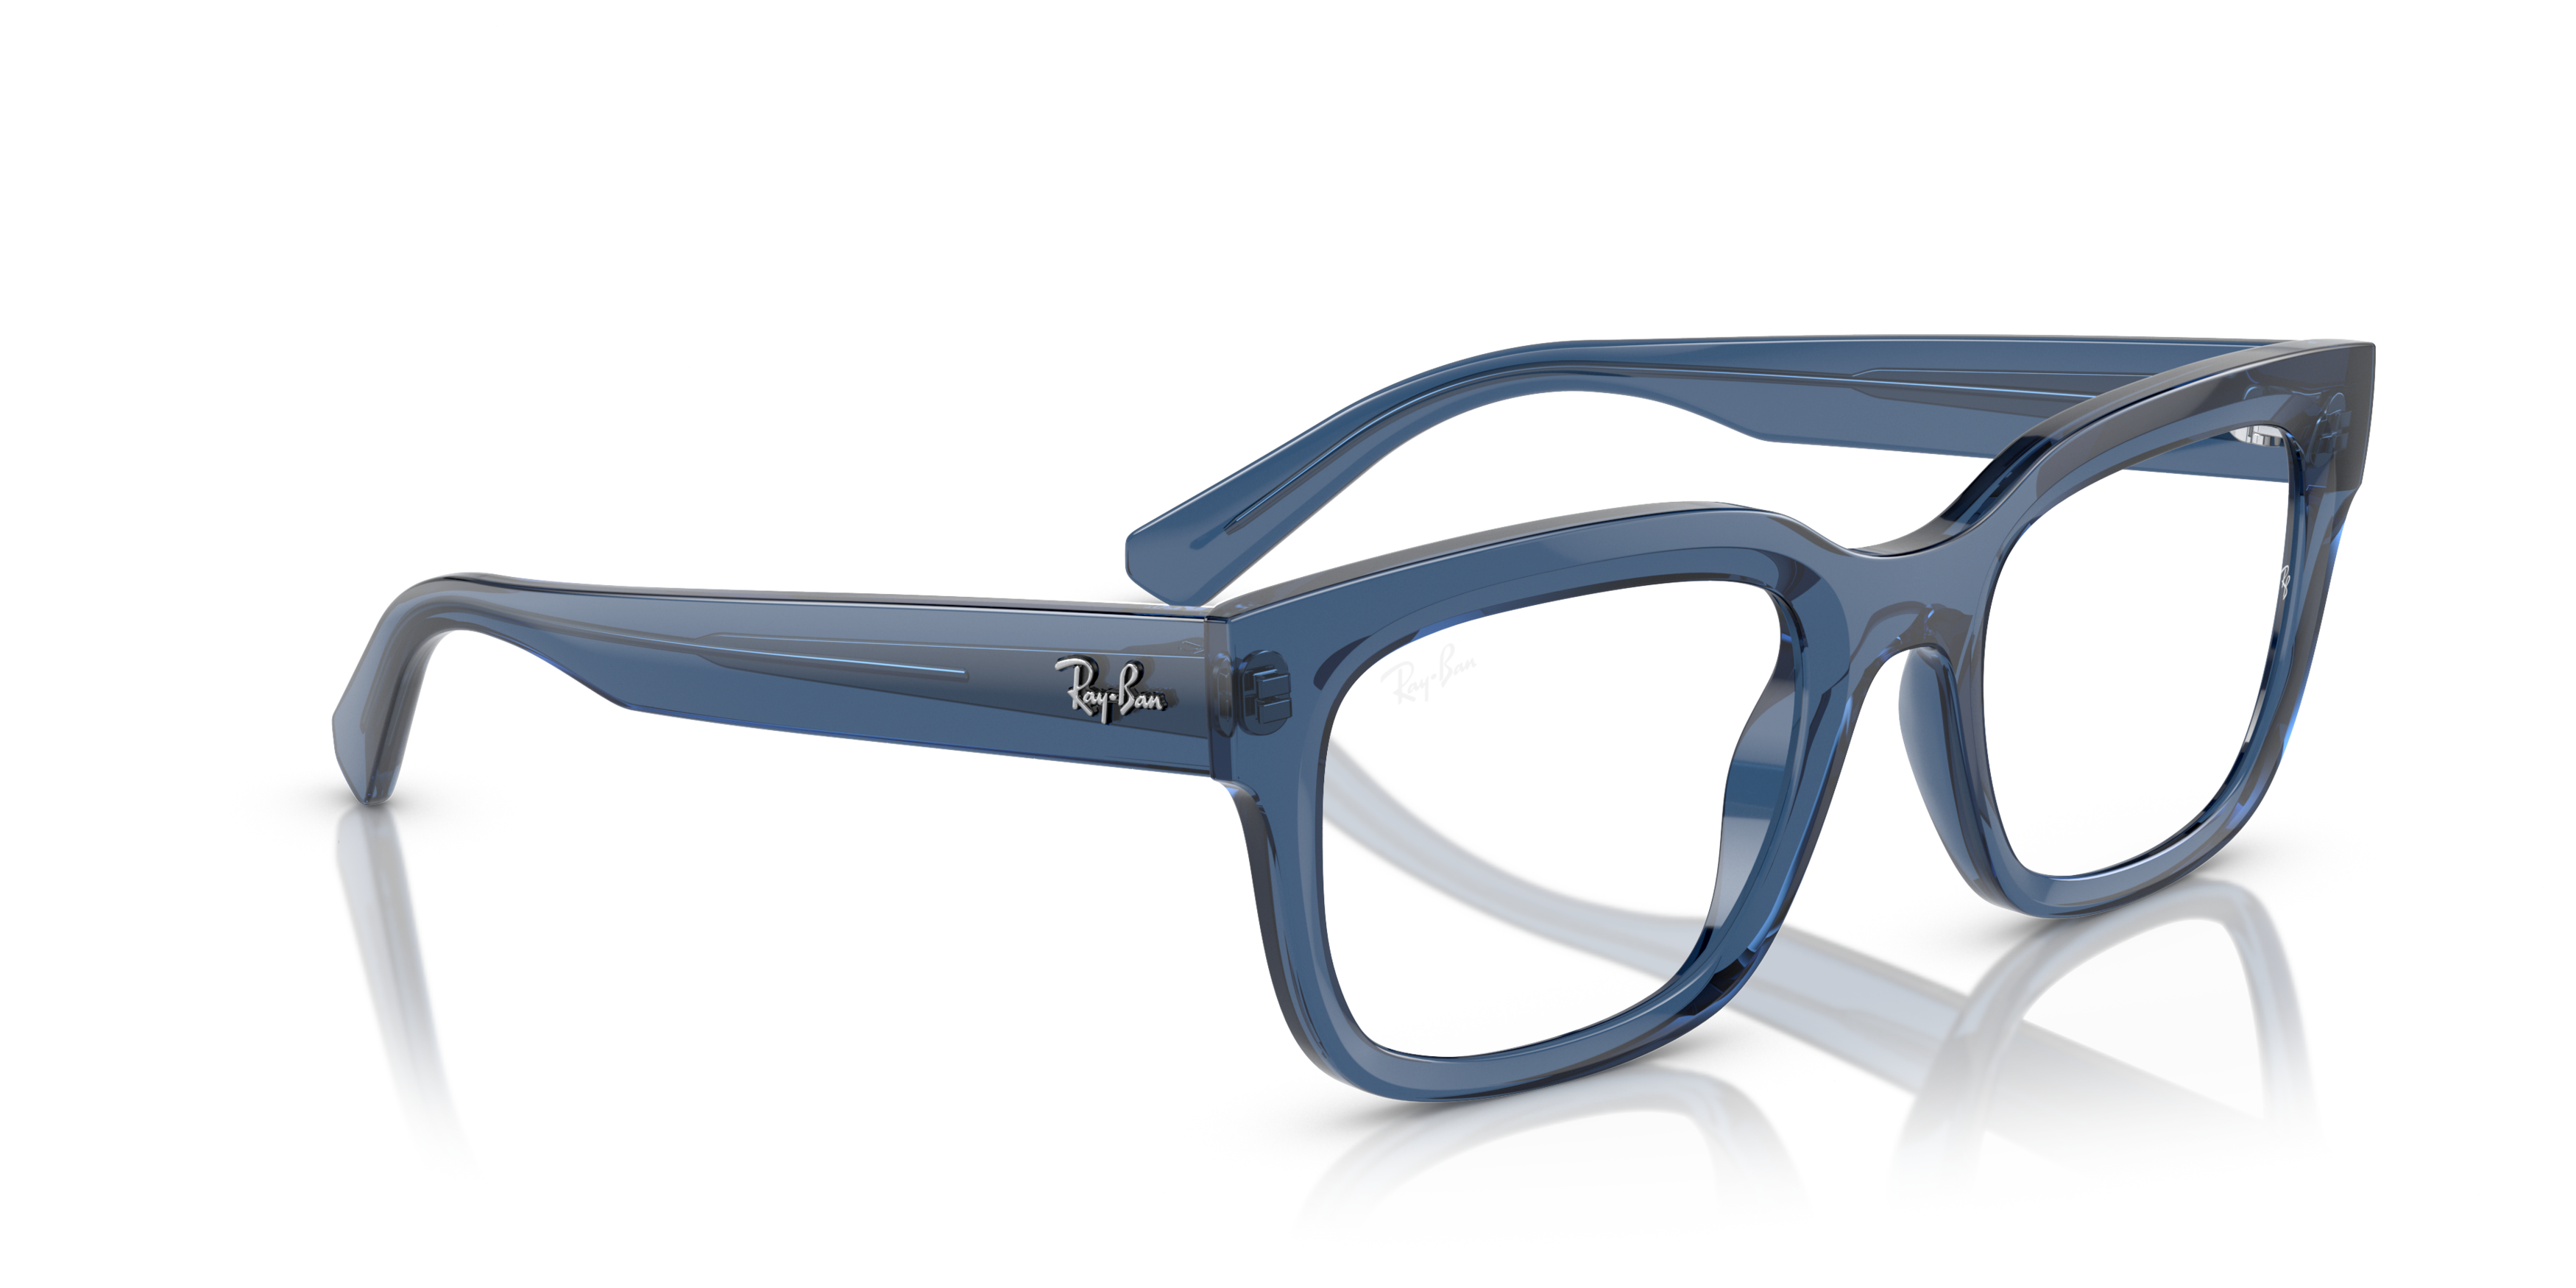 Angle_Right01 Ray-Ban RX 7217 Glasses Transparent / Transparent, Blue